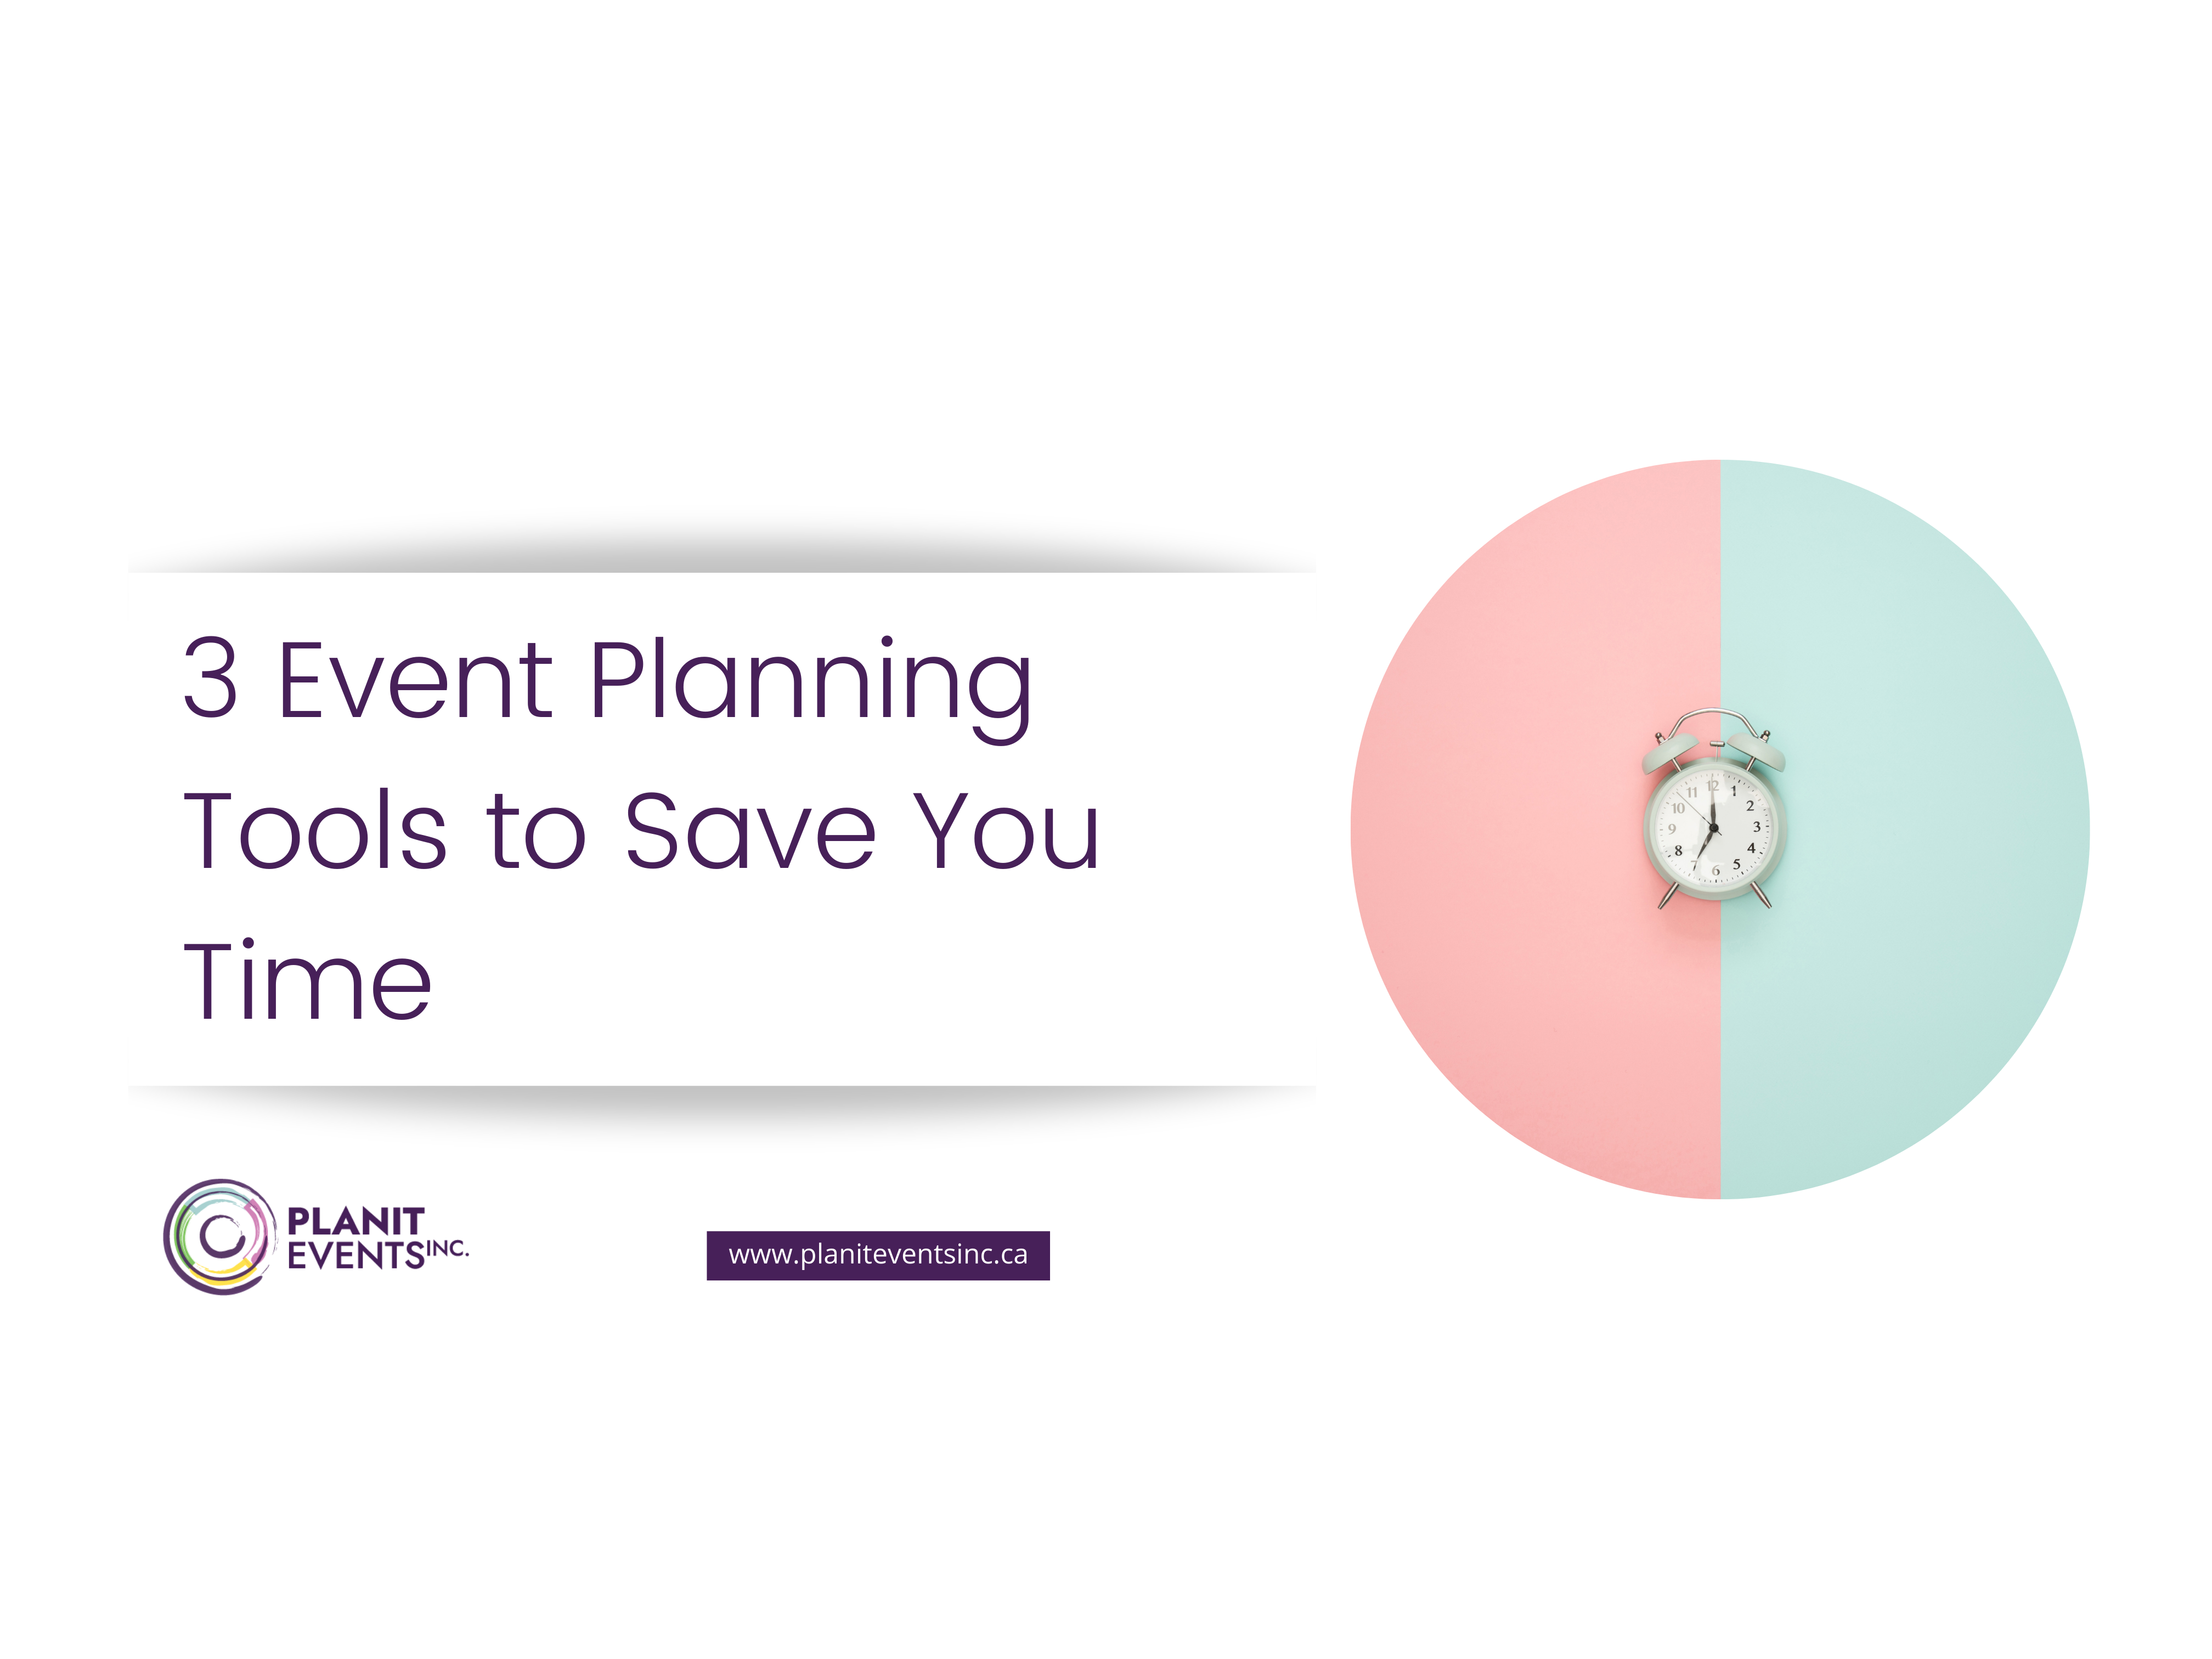 3 Event Planning Tools to Save You Time